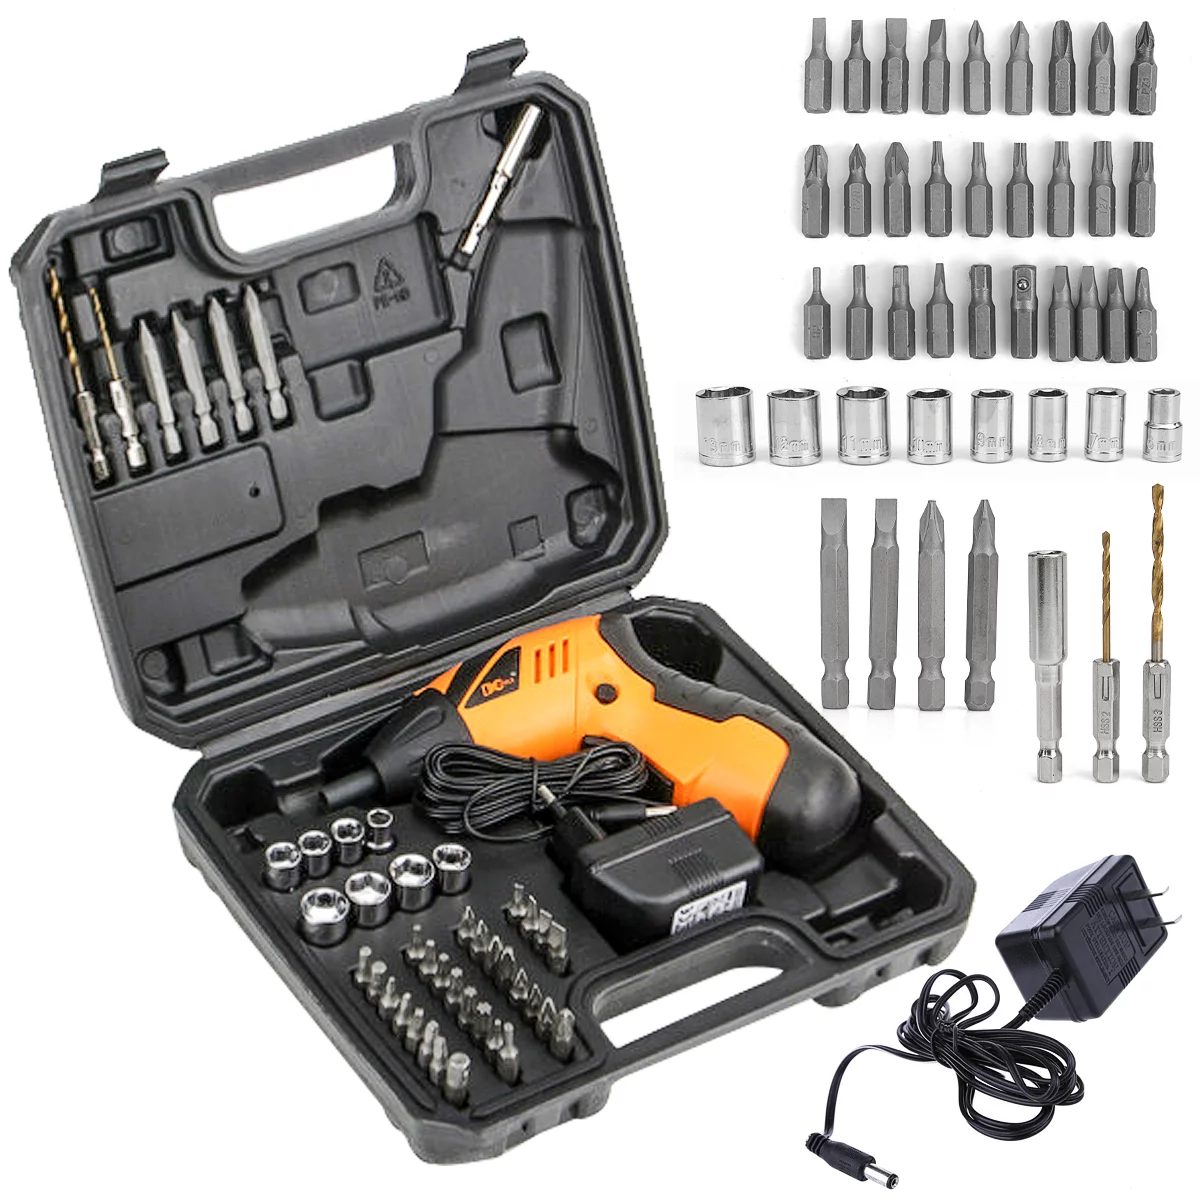 45 PCS 4.8V Electric Screwdriver Drill Kit Power Tool, Rechargeable Pivoting Screwdriver Set, Wireless Cordless Electric Screwdriver Toolbox W/LED Lighting